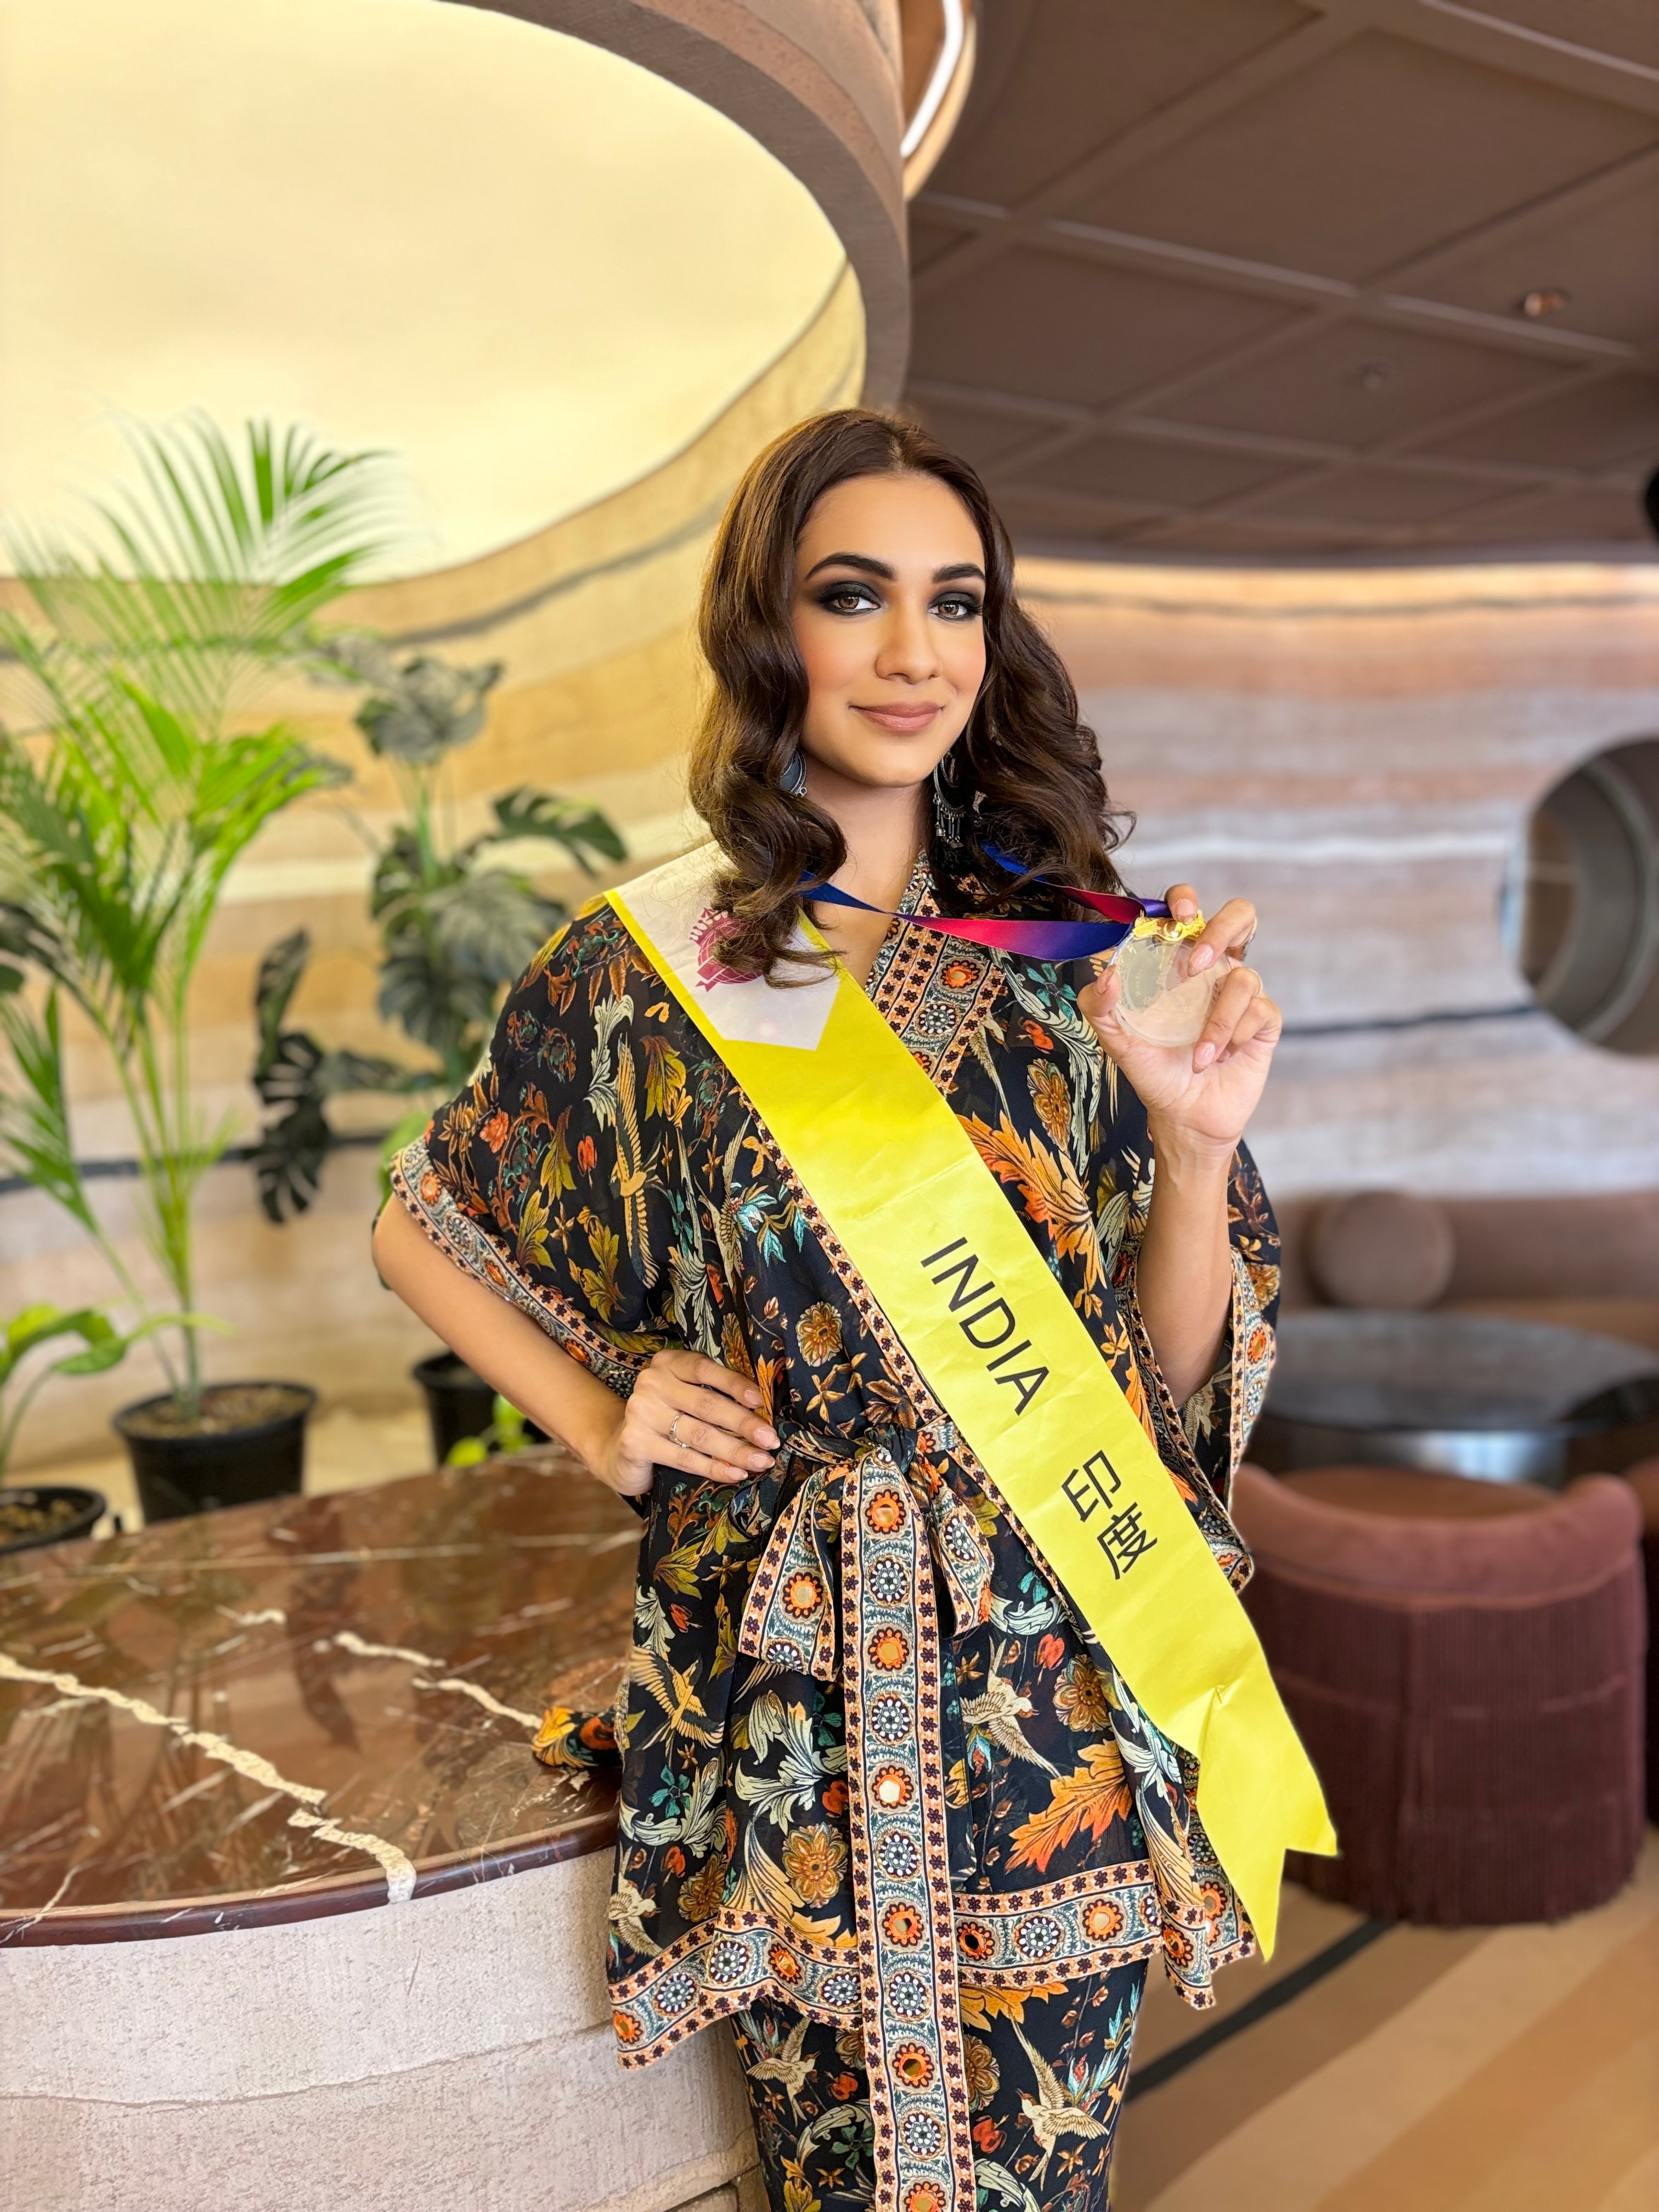 India’s Asmita Chakraborty won the Best in Talent award at the 2023 Miss Tourism World contest